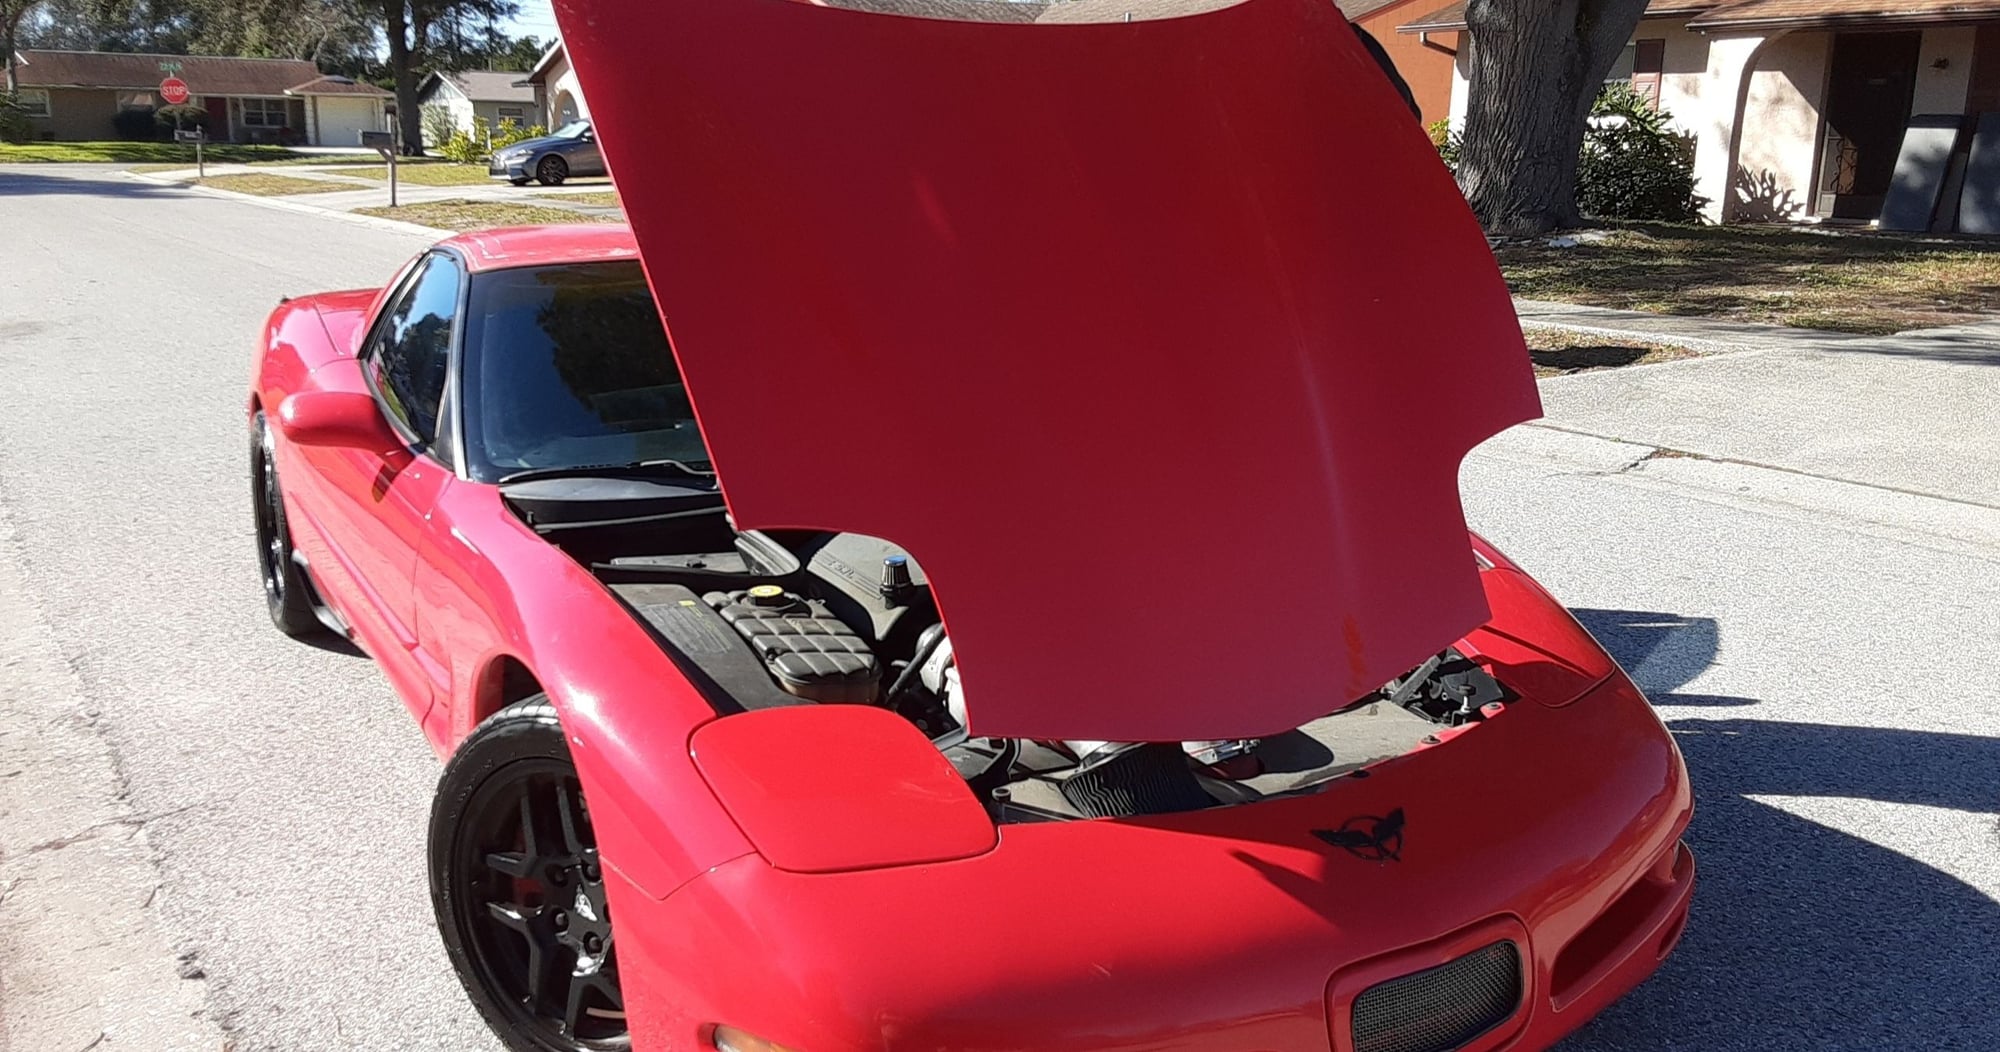 2000 Chevrolet Corvette - 2000 Torch Red FRC. ECS Supercharged 590 RWHP. 71K Miles. Tampa, FL. - Used - VIN 1G1YY12G0Y5100456 - 710,000 Miles - 8 cyl - 2WD - Manual - Red - Saint Petersburg, FL 33709, United States